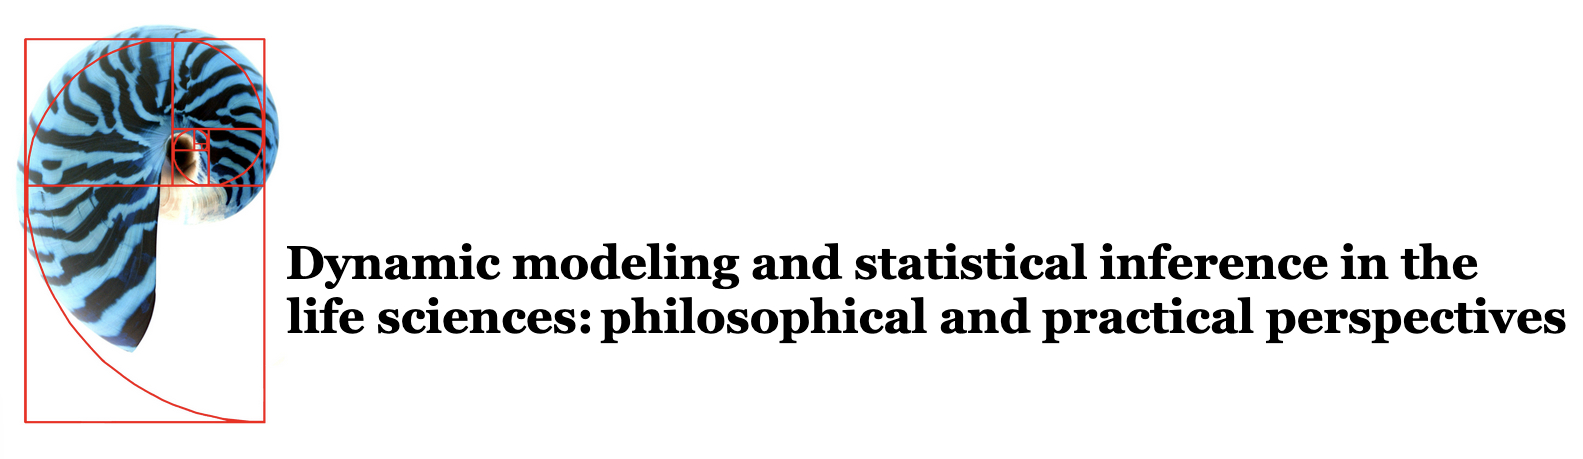 Workshop: "Dynamic modeling and statistical inference in the life sciences: philosophical and practical perspectives"